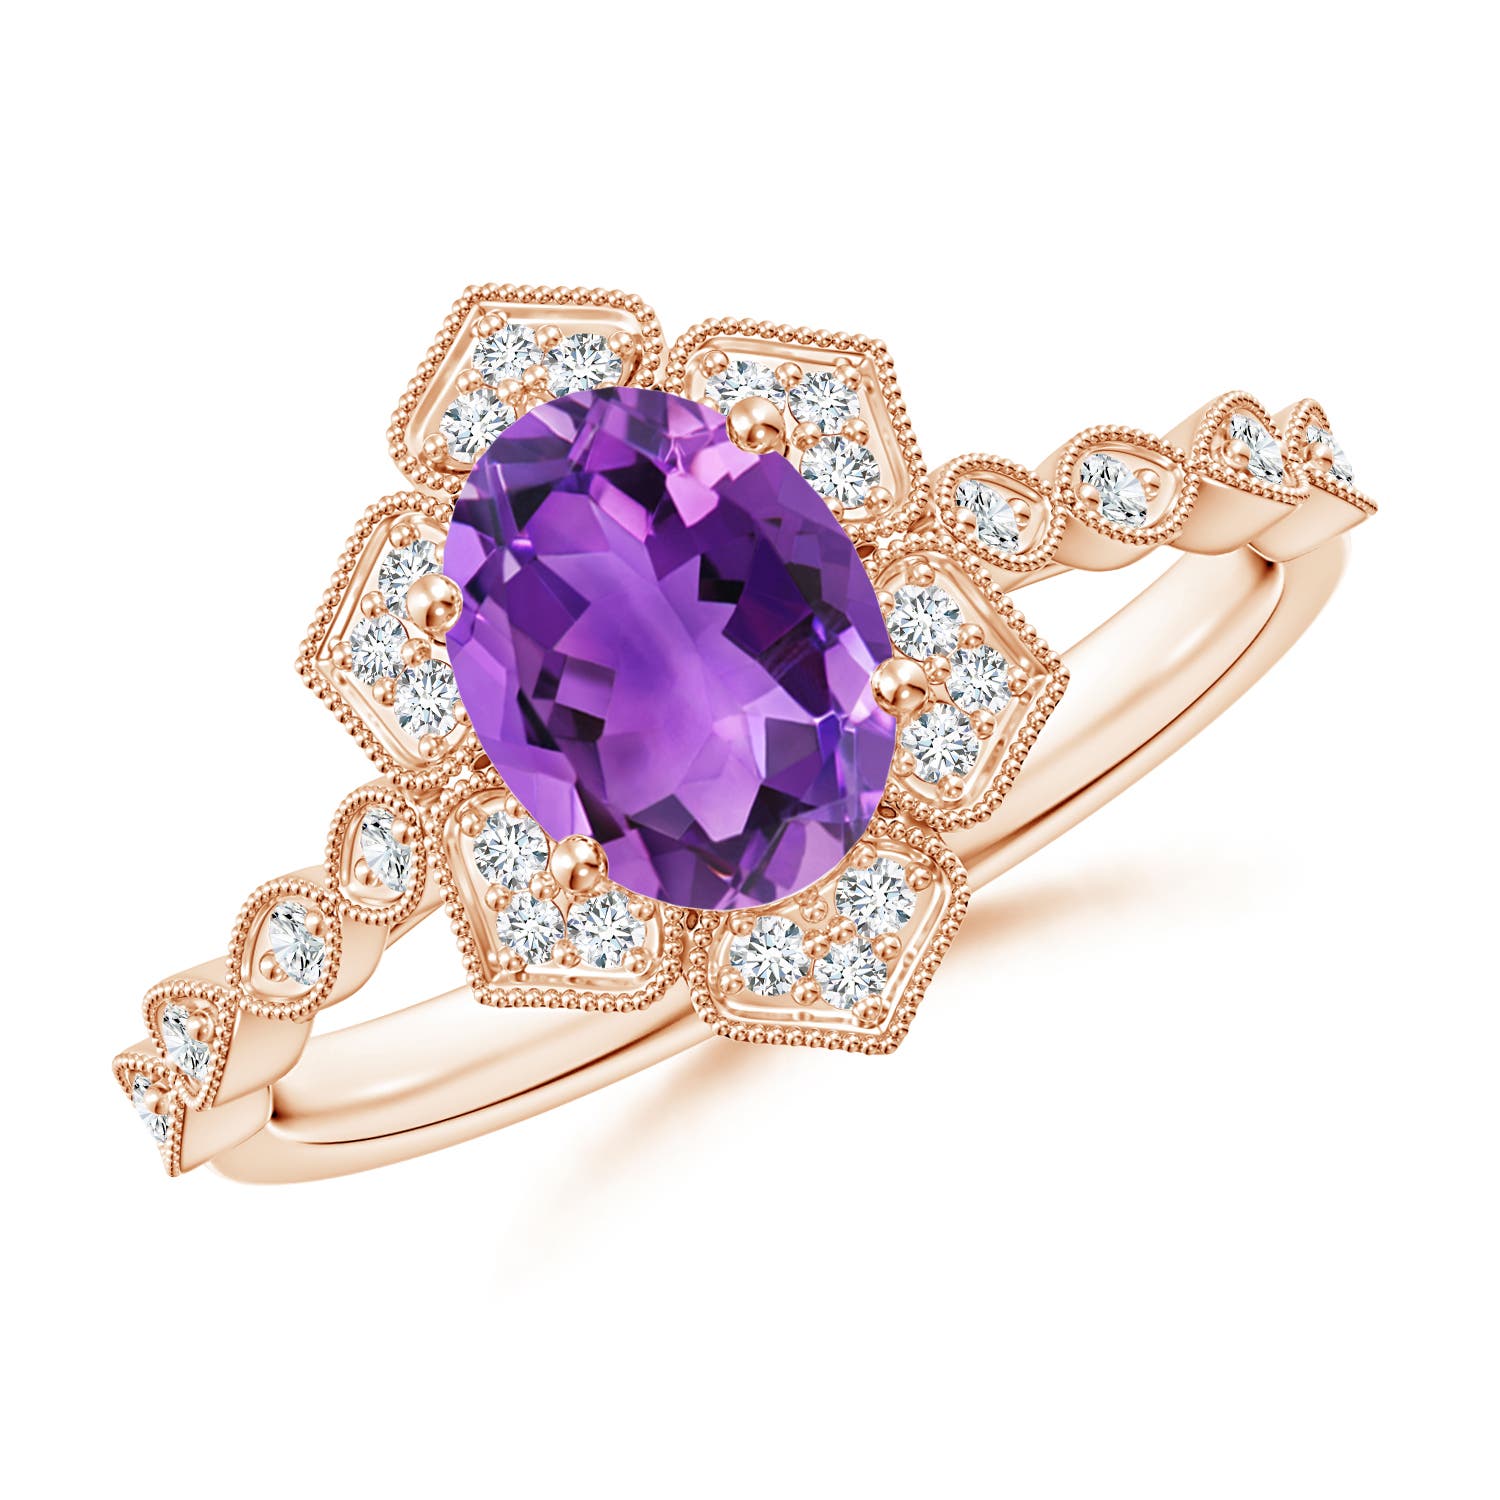 AAA - Amethyst / 1.33 CT / 14 KT Rose Gold